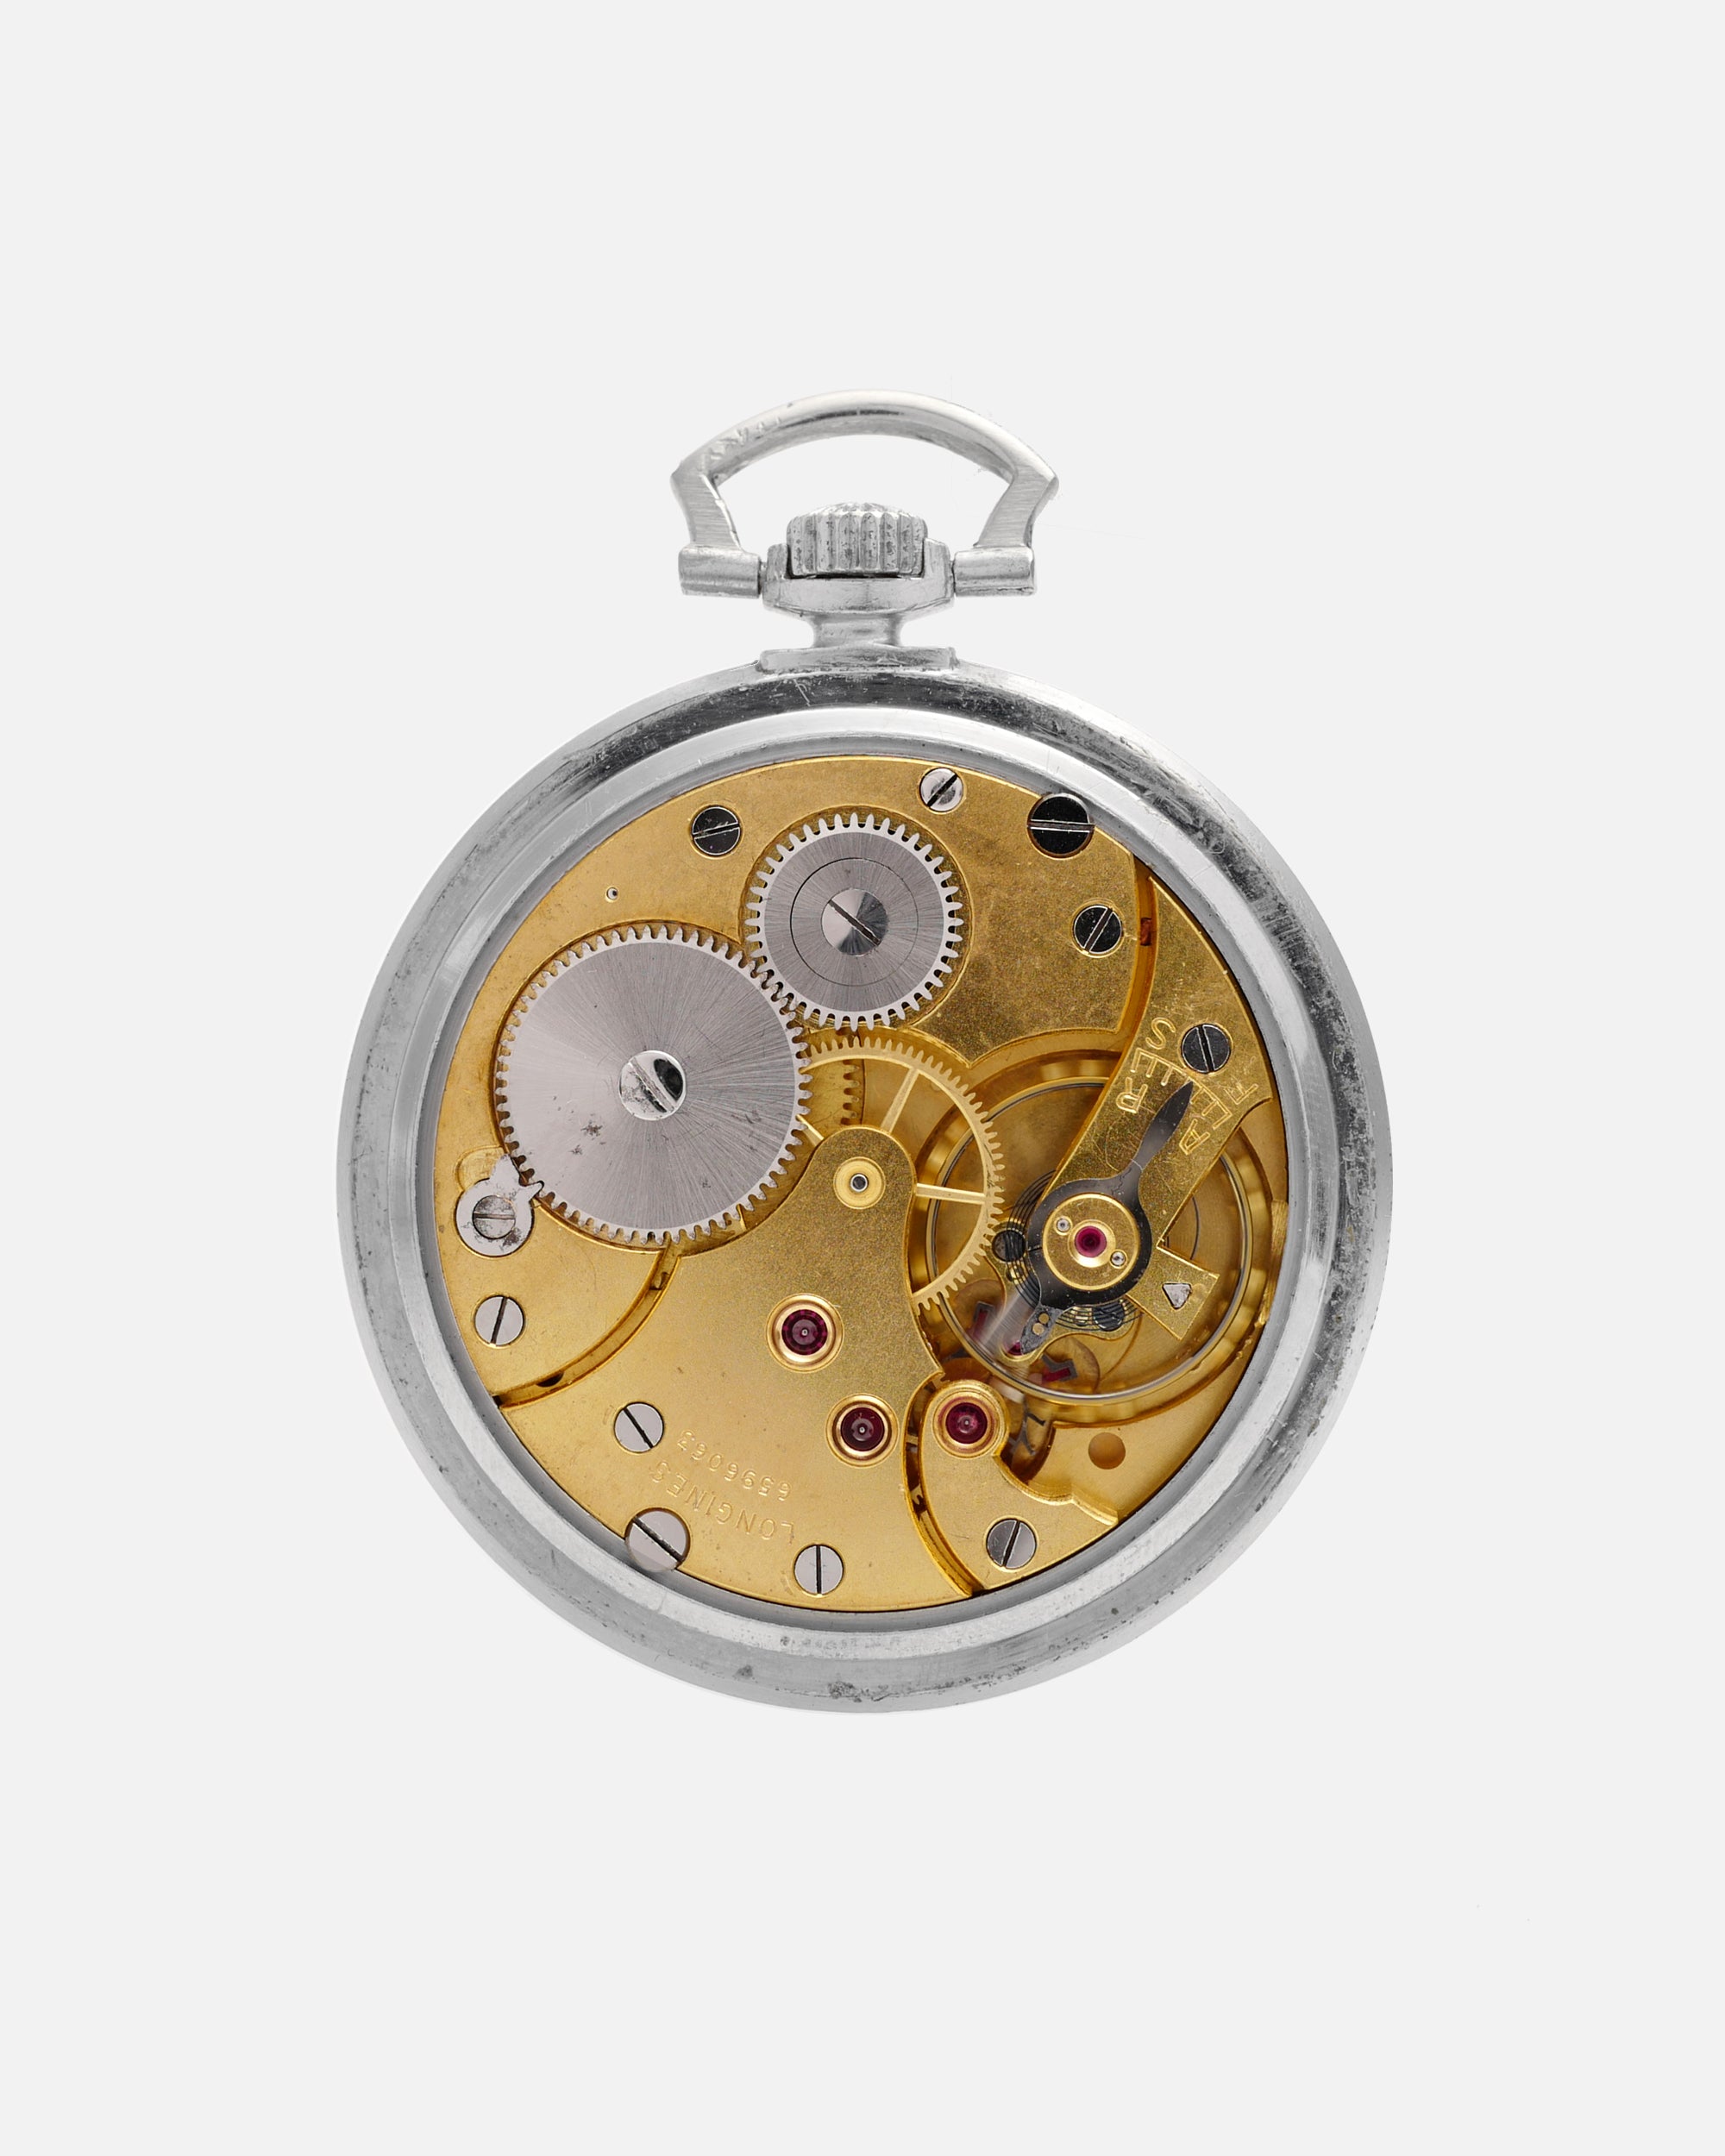 1943 Longines Pocket Watch Ref. 3450 | Sector Dial | Stepped Case | Extract From Archives